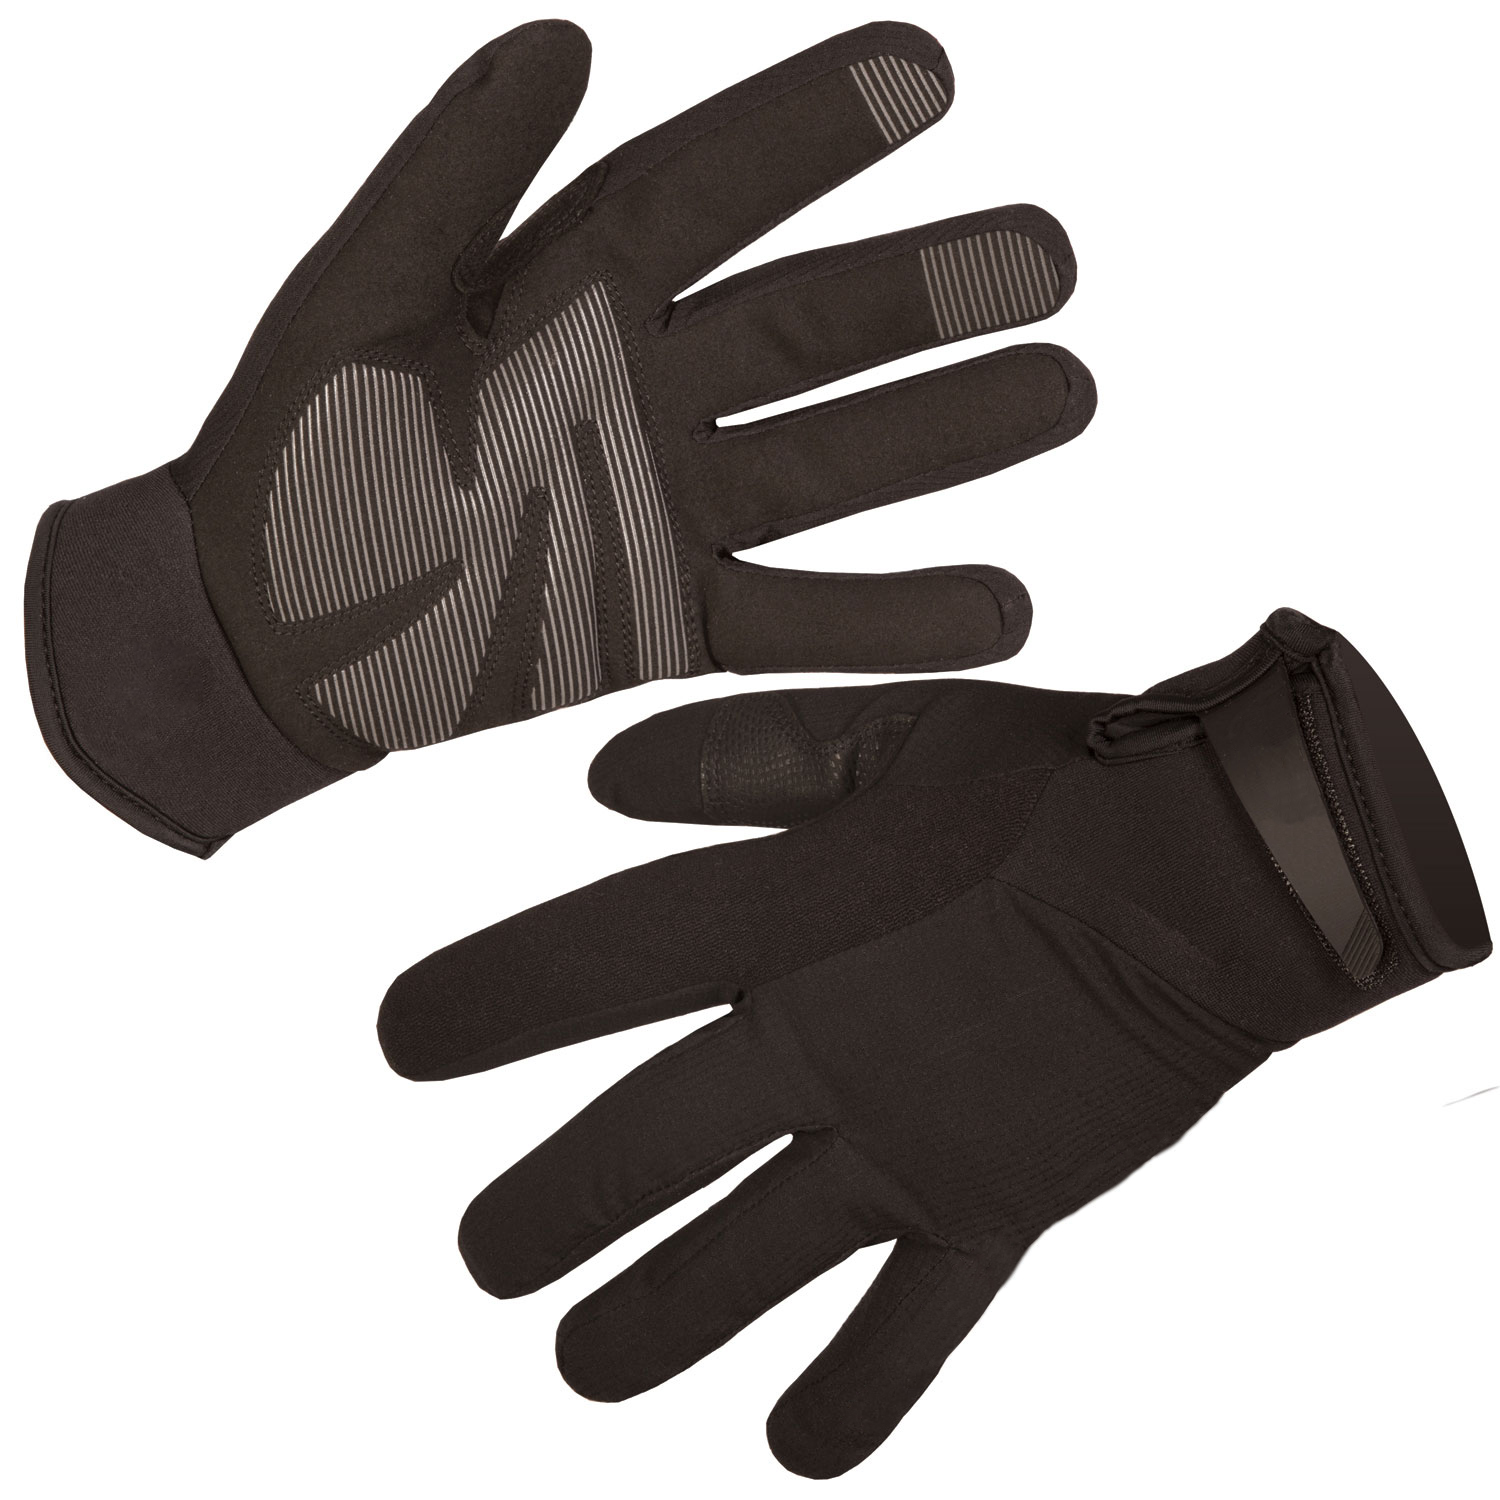 Highly dexterous gel padding microfiber palm durable cycling gloves